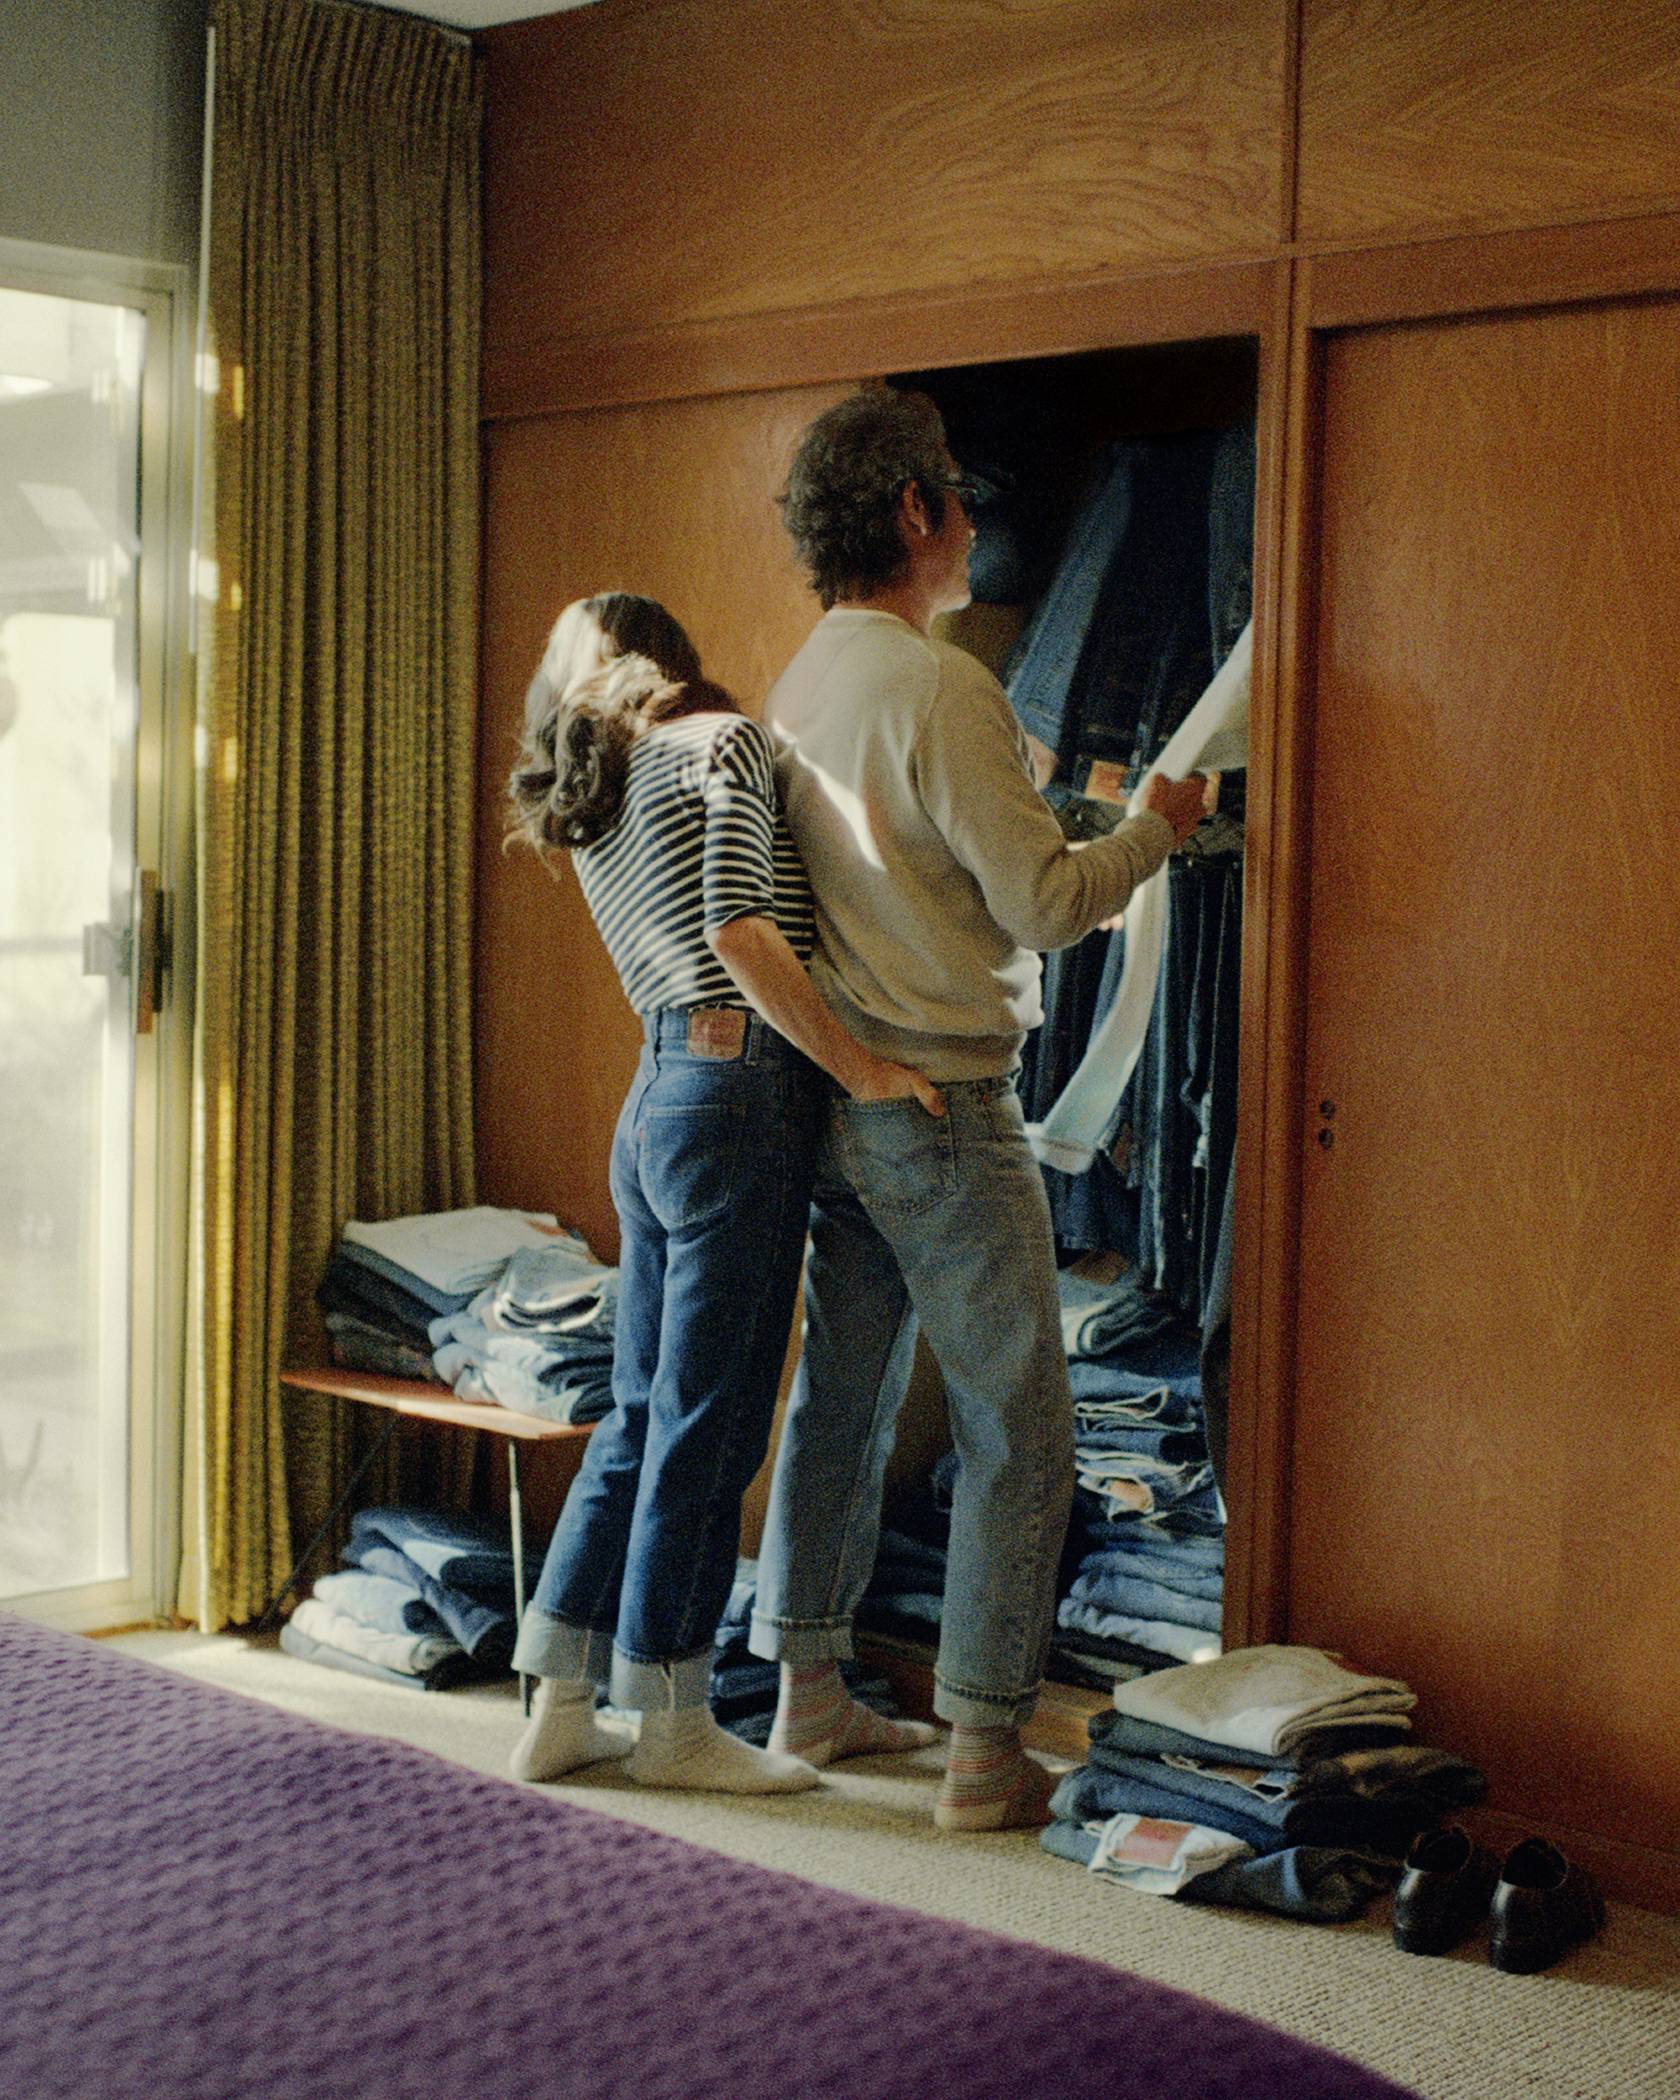 A husband and wife standing in their bedroom looking in their closet, both wearing Levi's jeans.